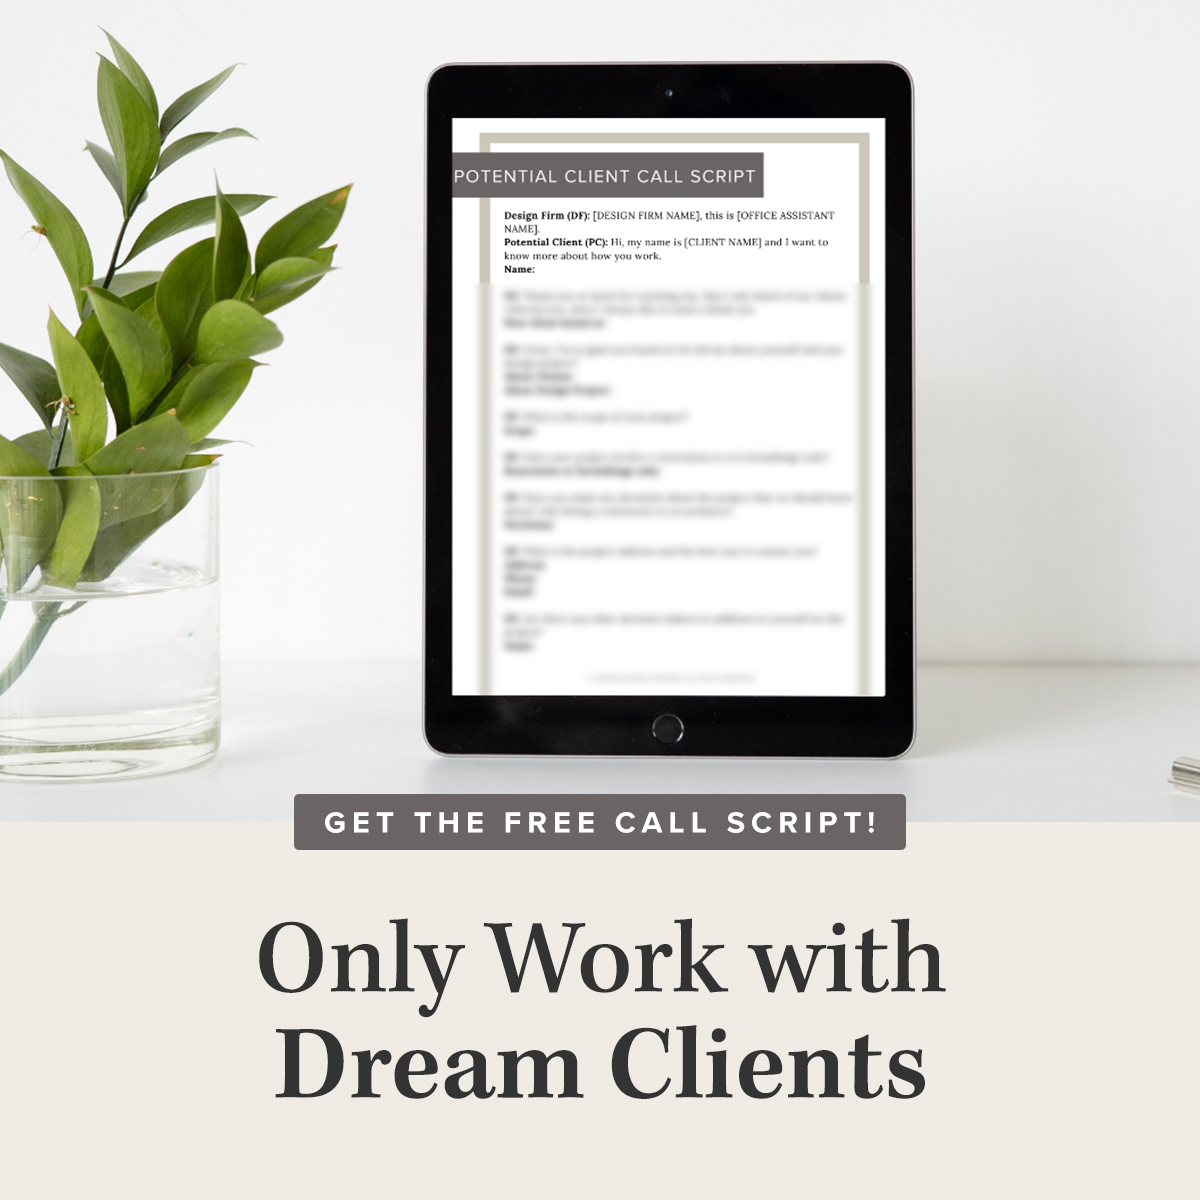 How to ONLY Work with Dream Clients